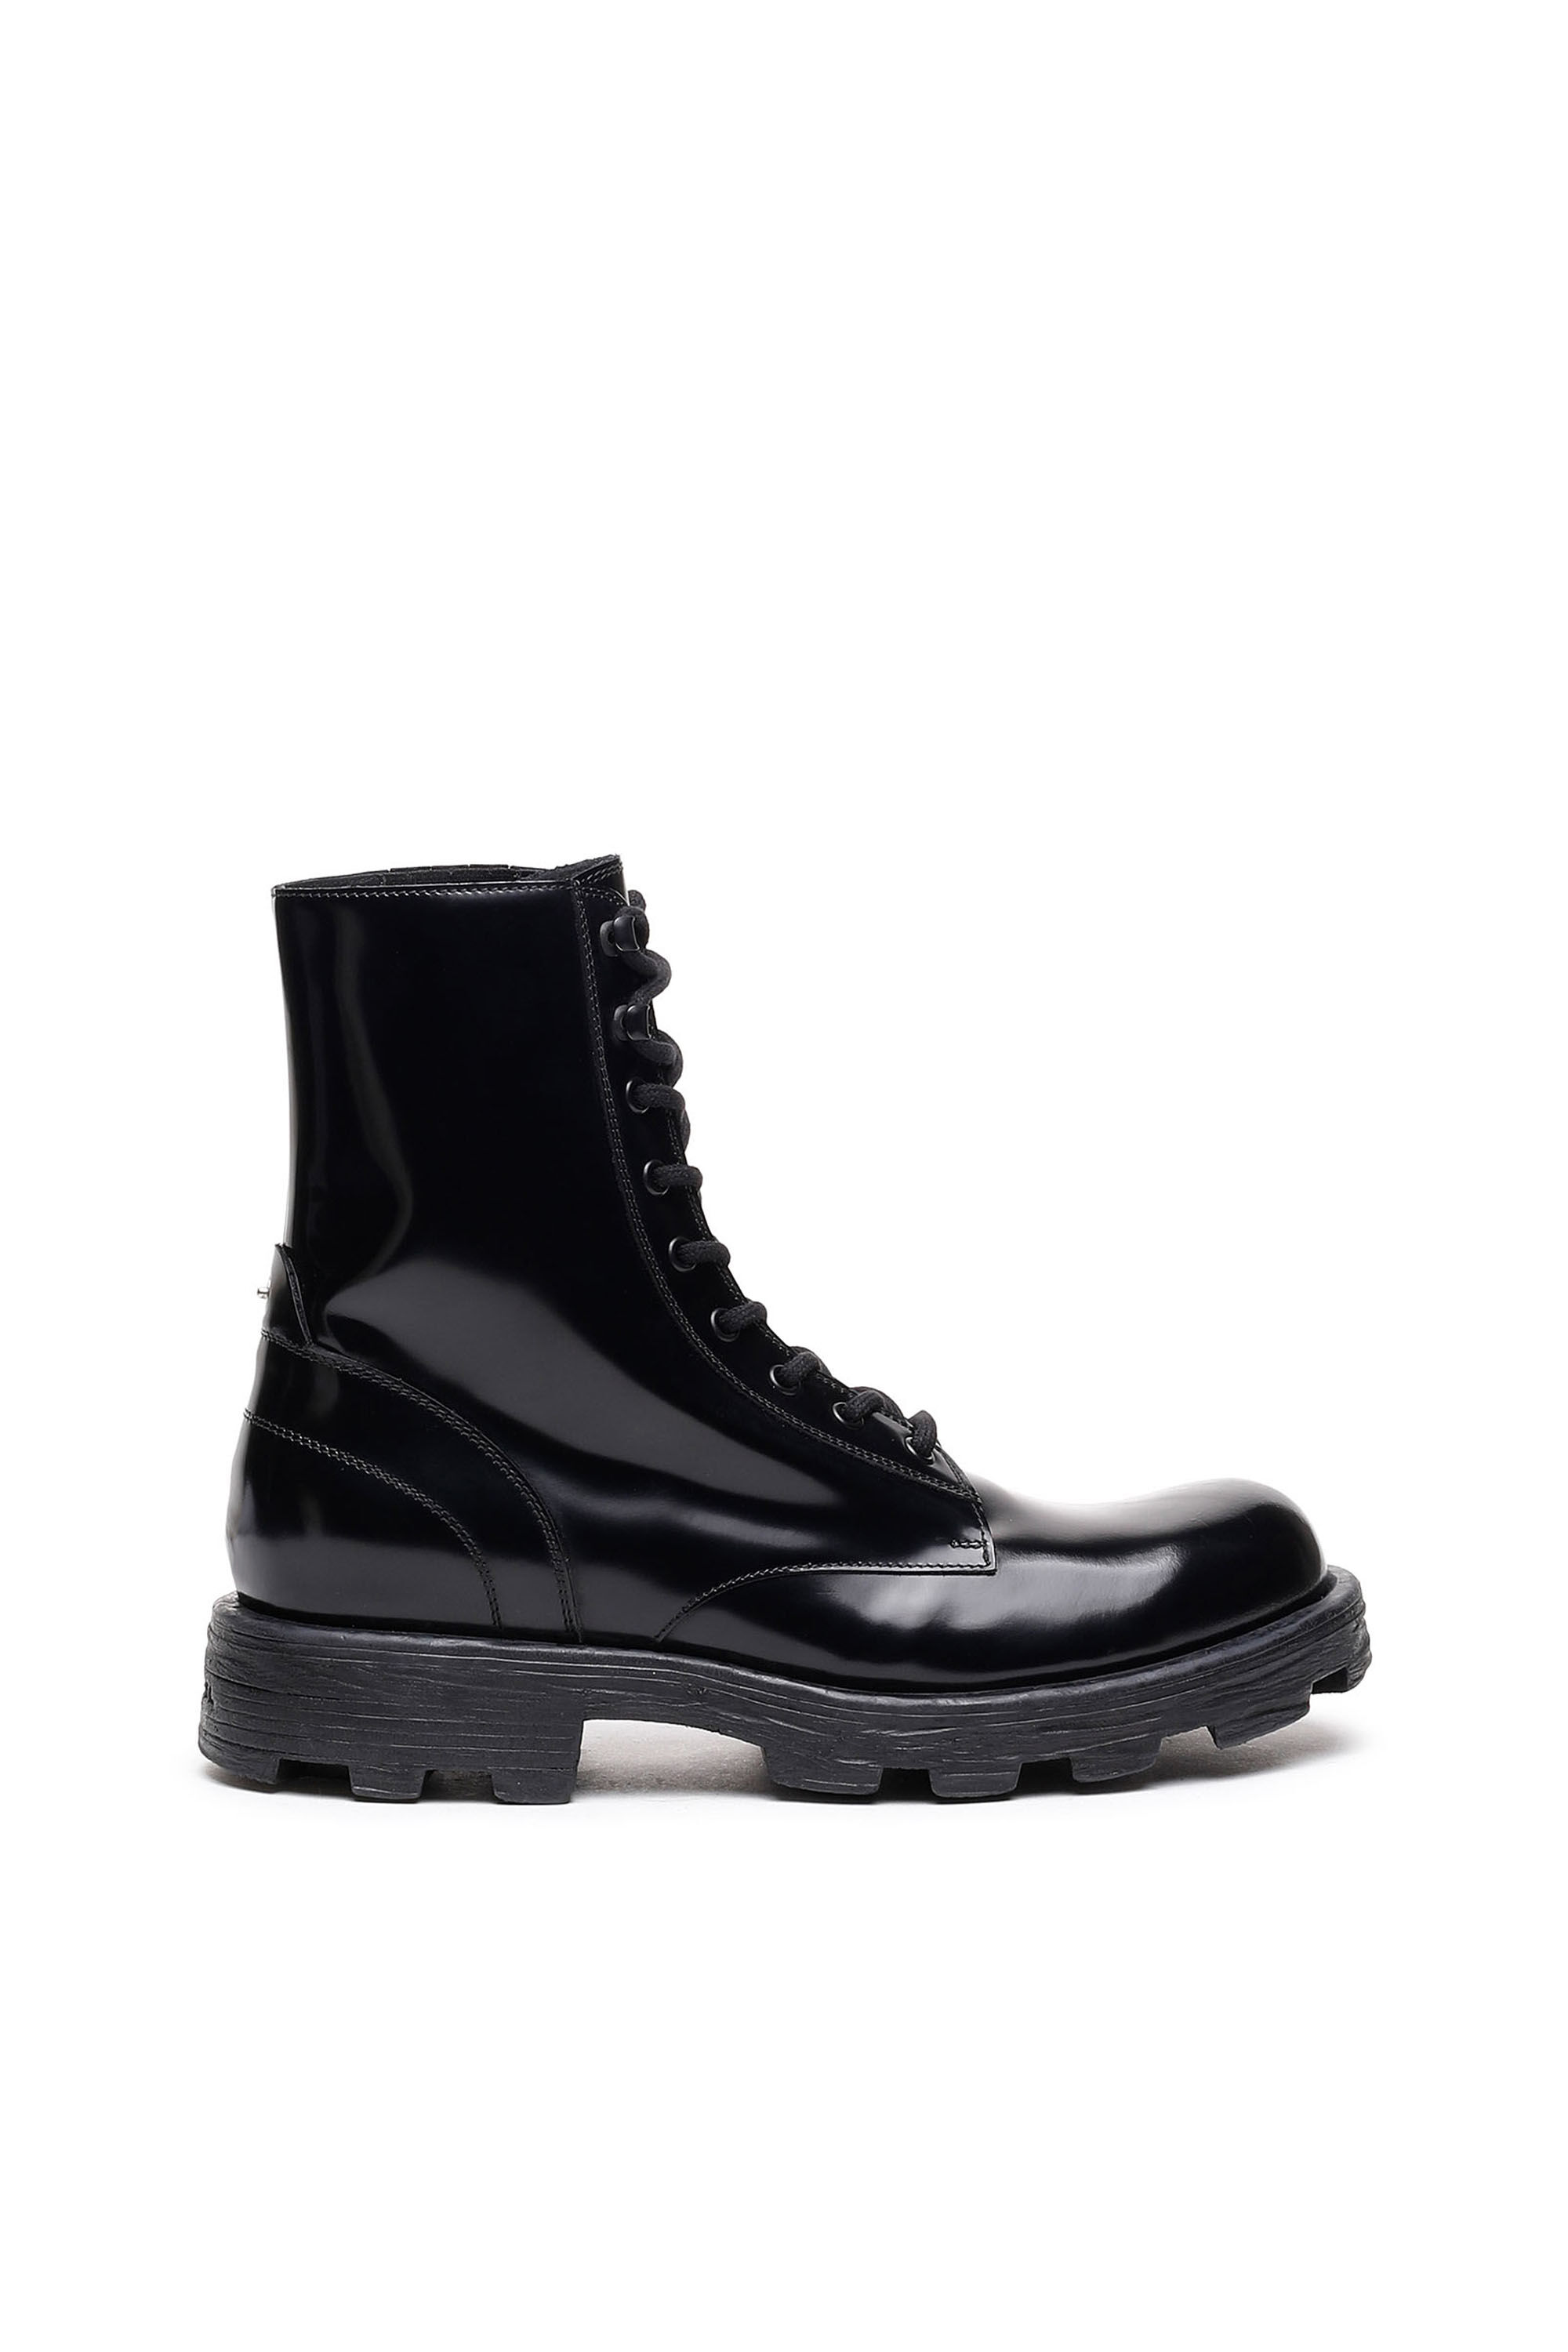 Diesel D-Hammer Lch ankle boots - Black